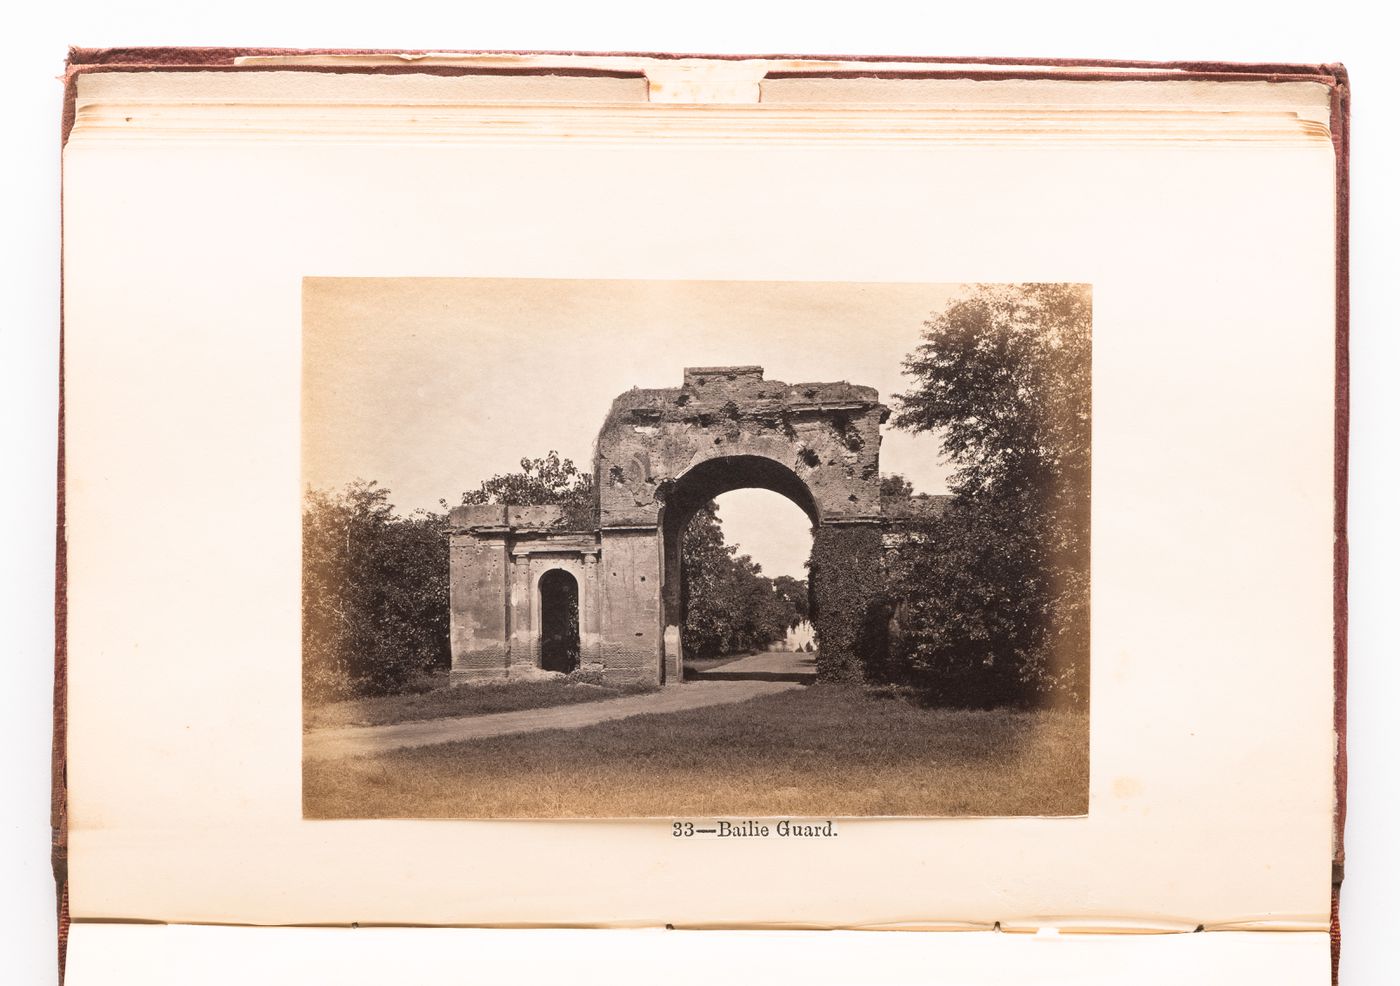 View of the Baillie Guard gateway, Lucknow, India